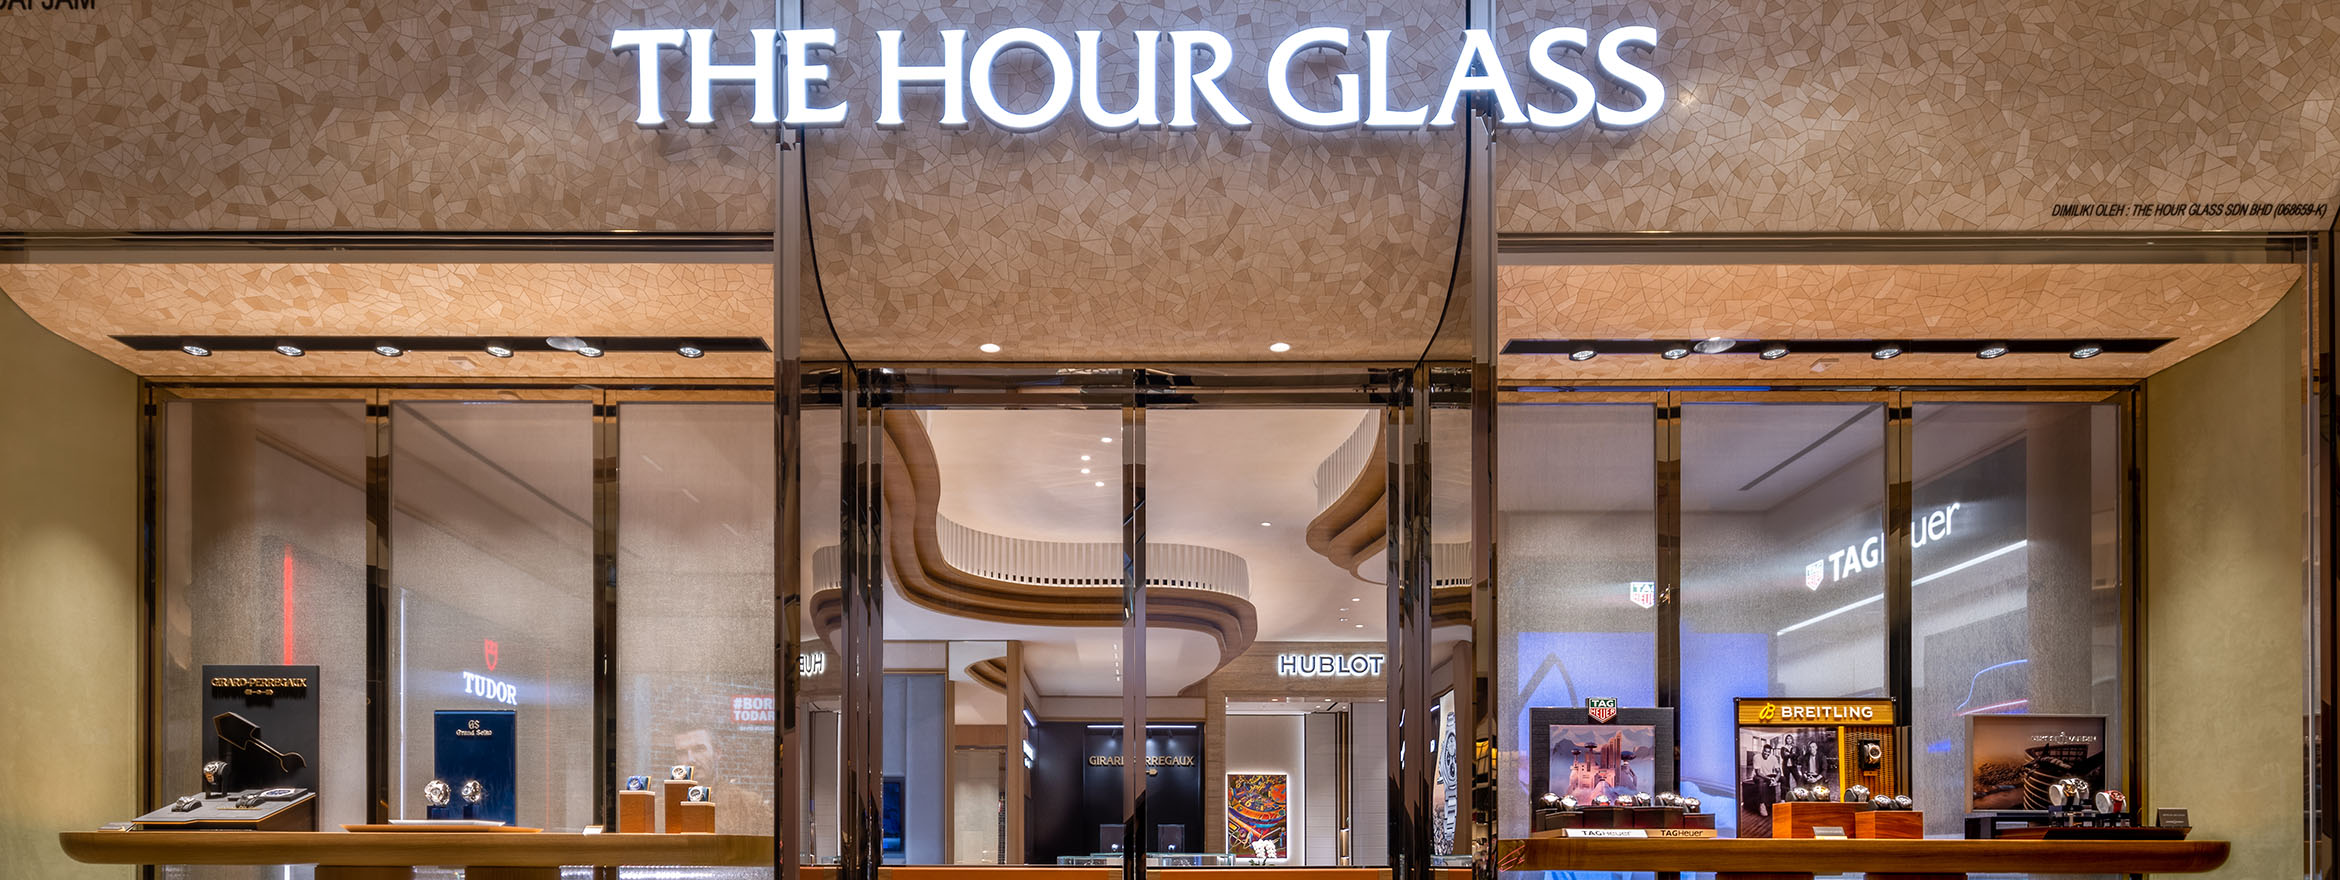 The Hour Glass Ventures to North Malaysia with a New Boutique at Gurney Plaza Penang